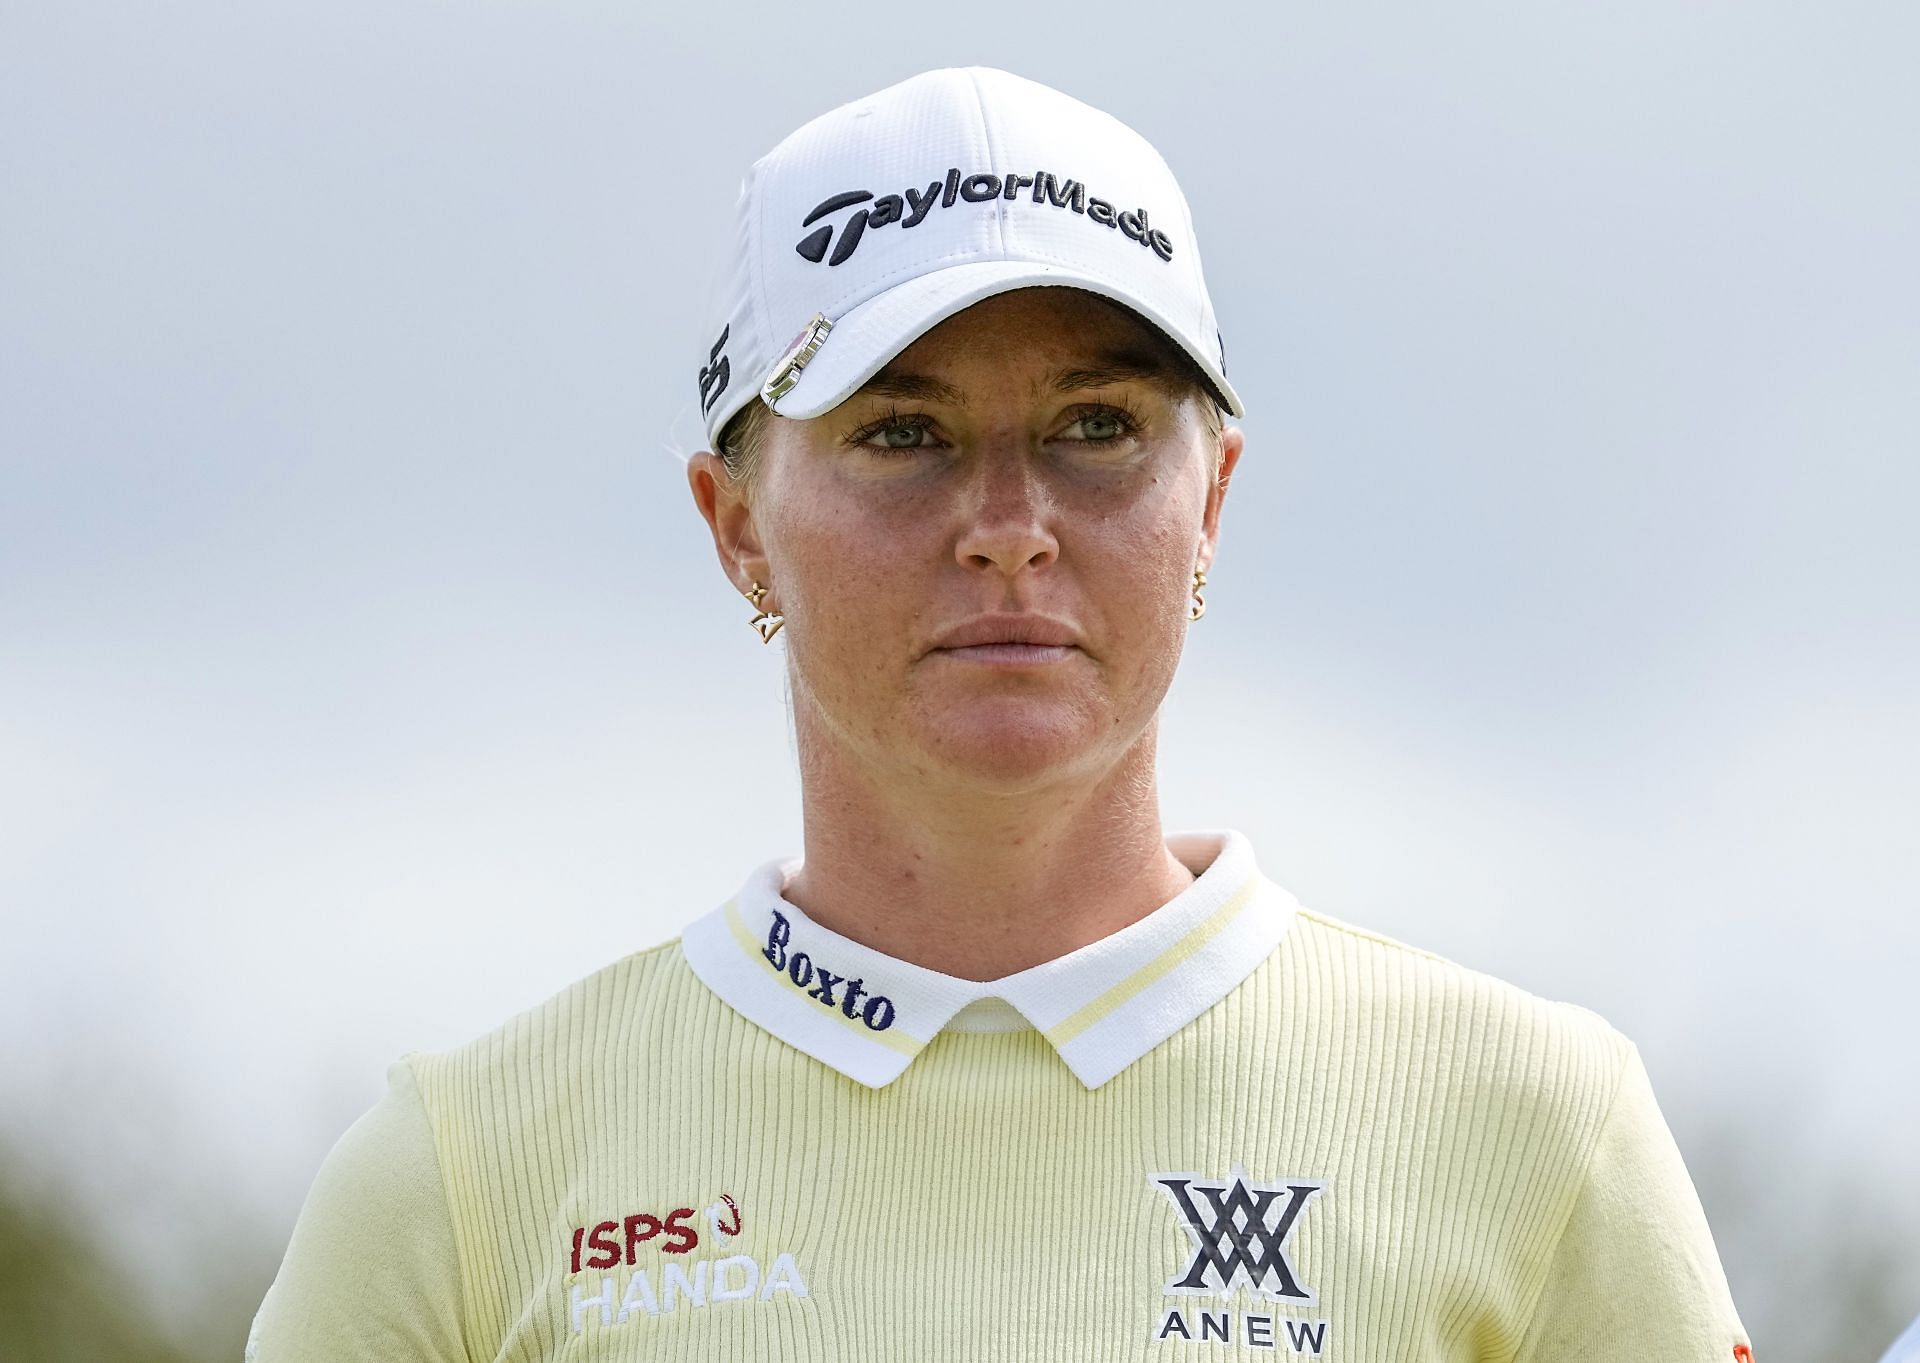 Charley Hull was diagnosed with ADHD recently